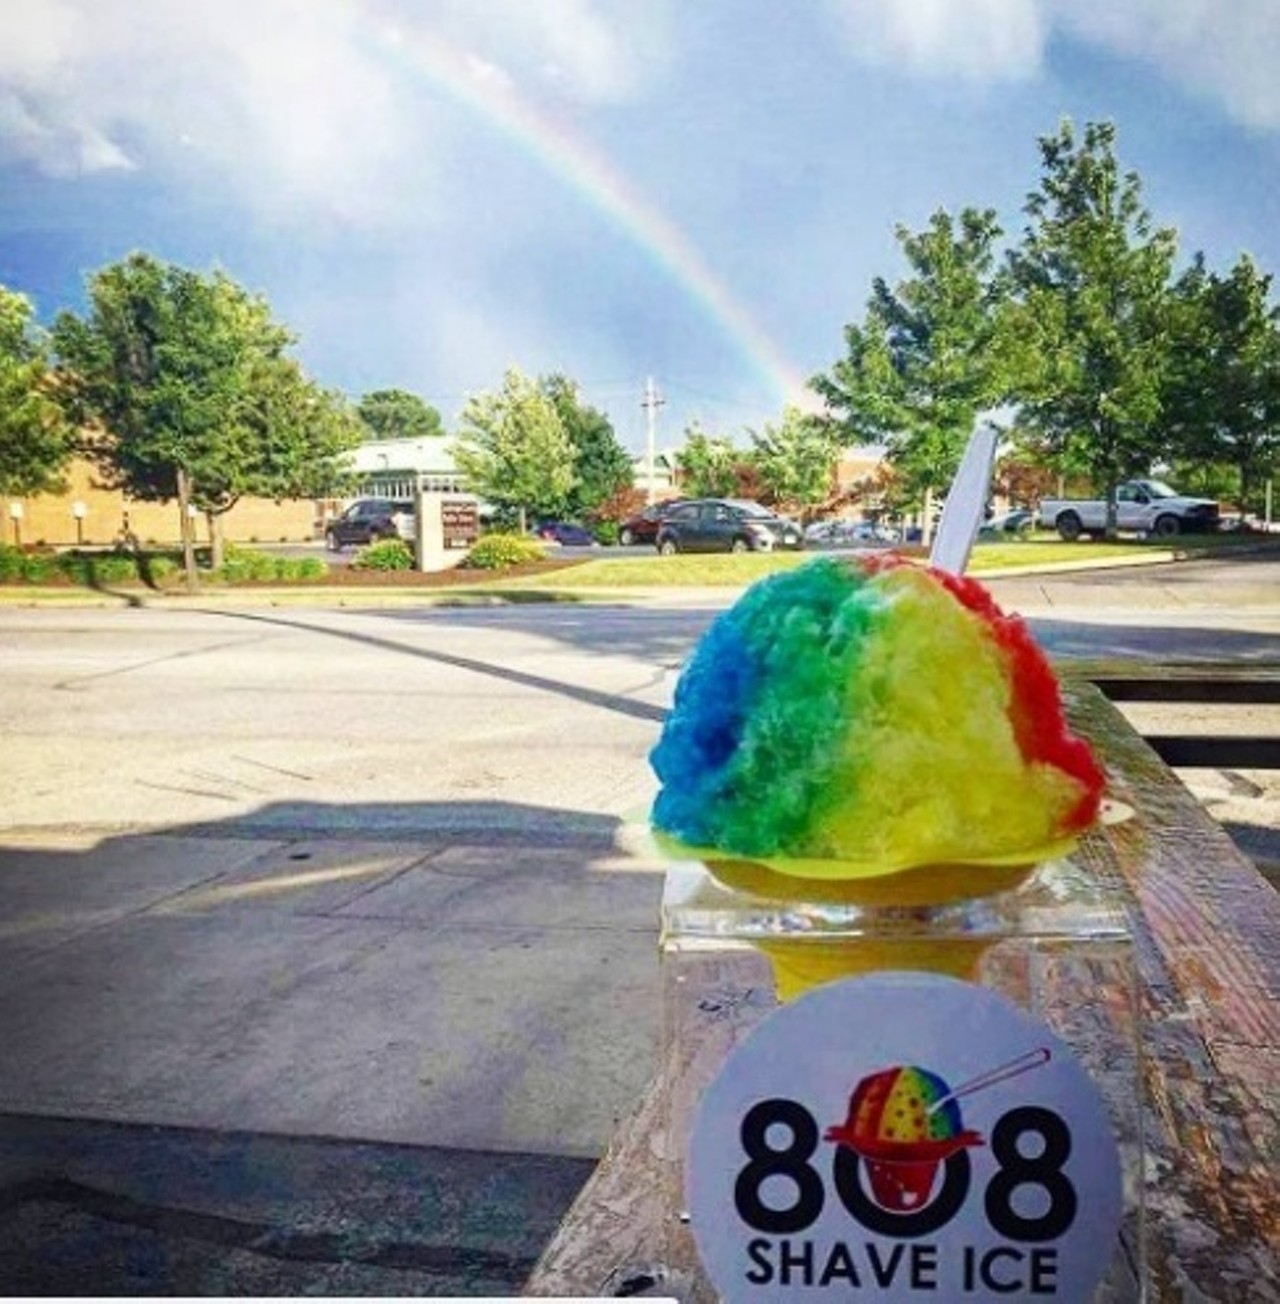  808 Shave Ice
21280 Lorain Rd., 440-465-5368
Their flavors are inspired by Hawaiian tastes, like the Lahaina Luna, a blend of pineapple, coconut and banana.
Photo via 808_shaveice/Instagram